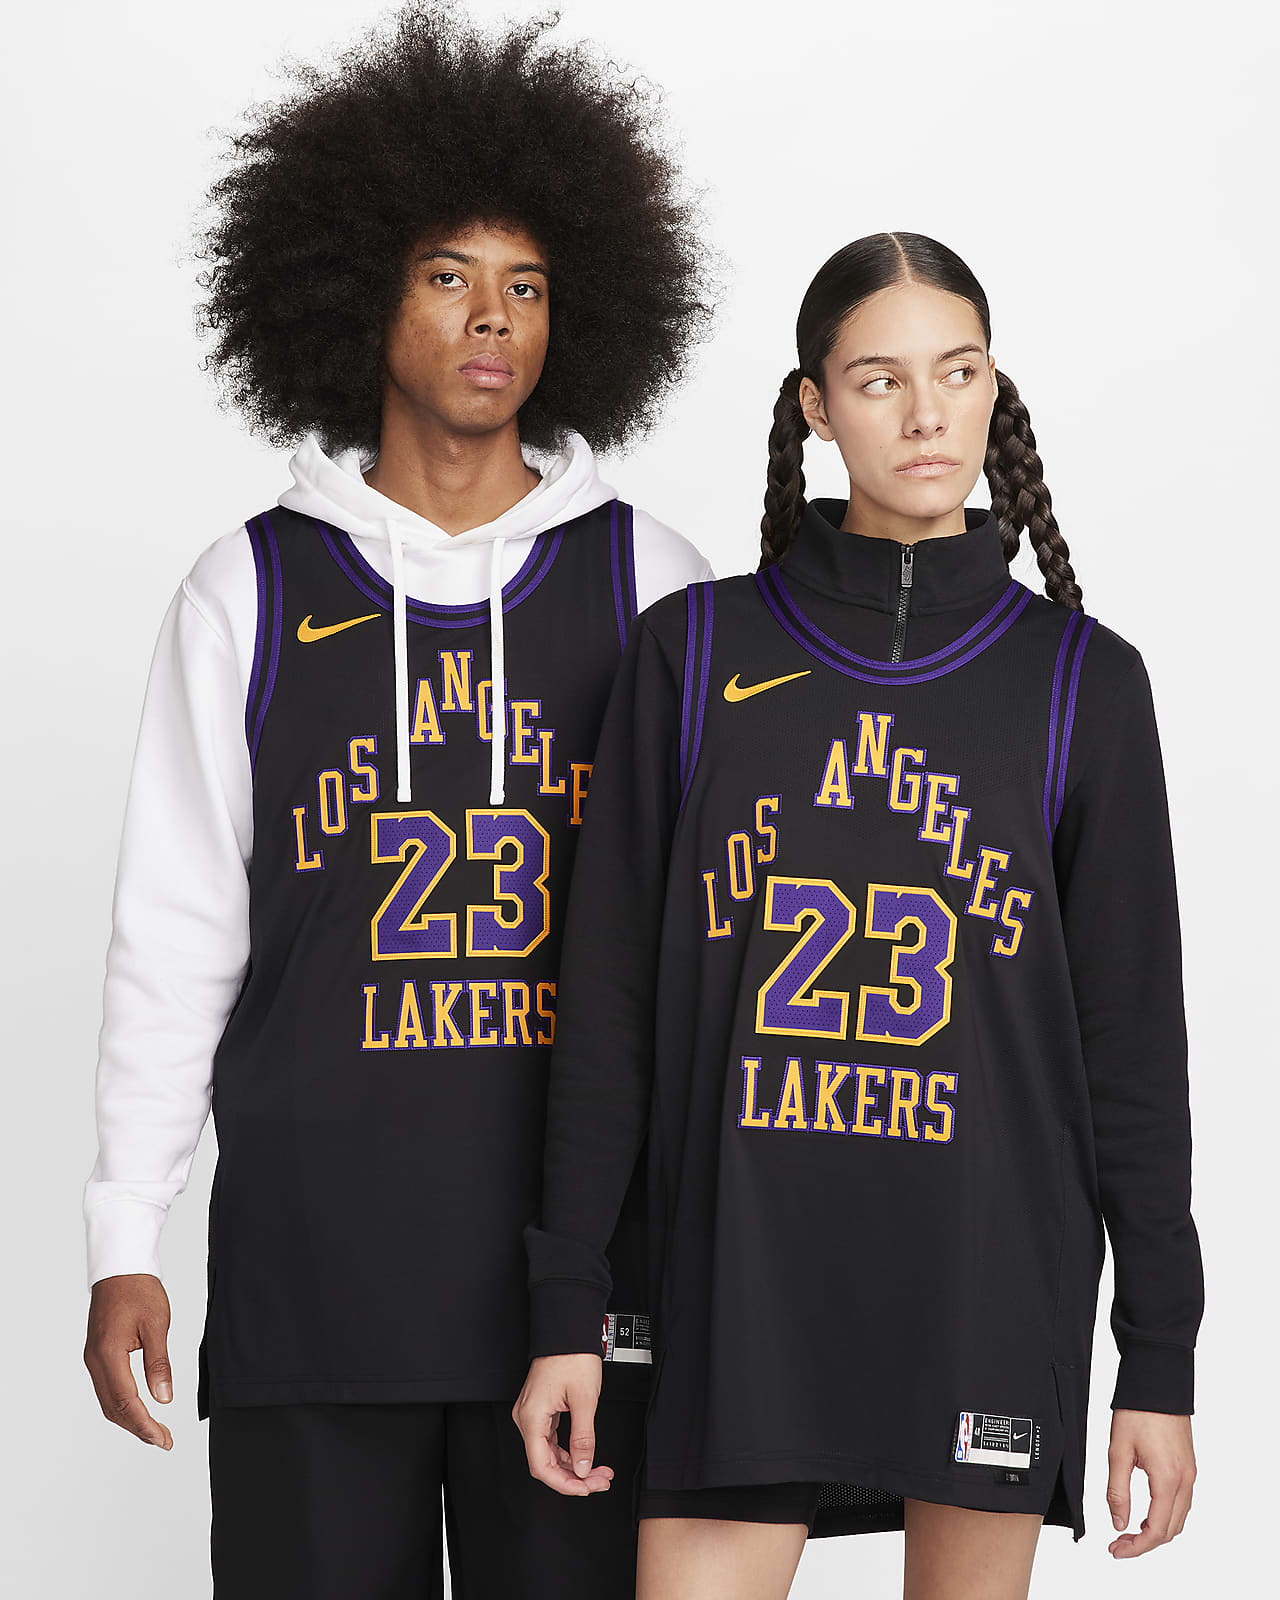 Los Angeles Lakers WinCraft 2023/24 City Edition 12oz. Slim Can